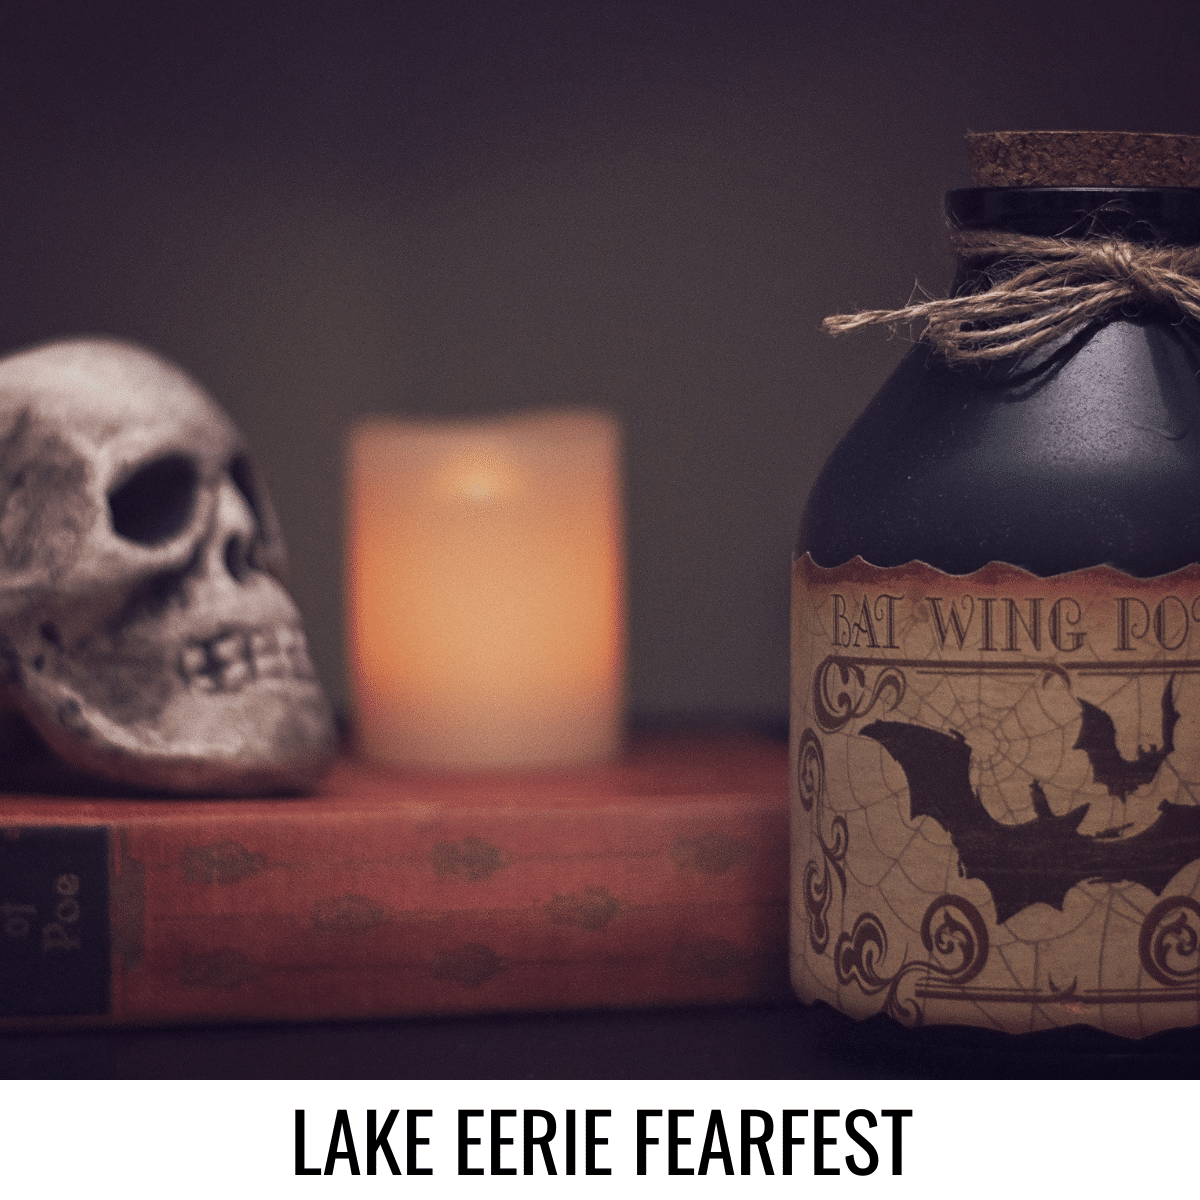 square image with a photo of a candle, a skull, and a bottle of potion on an Edgar Allen Poe book. A white strip at the bottom has the text Lake Eerie Fearfest. Image via Canva pro license